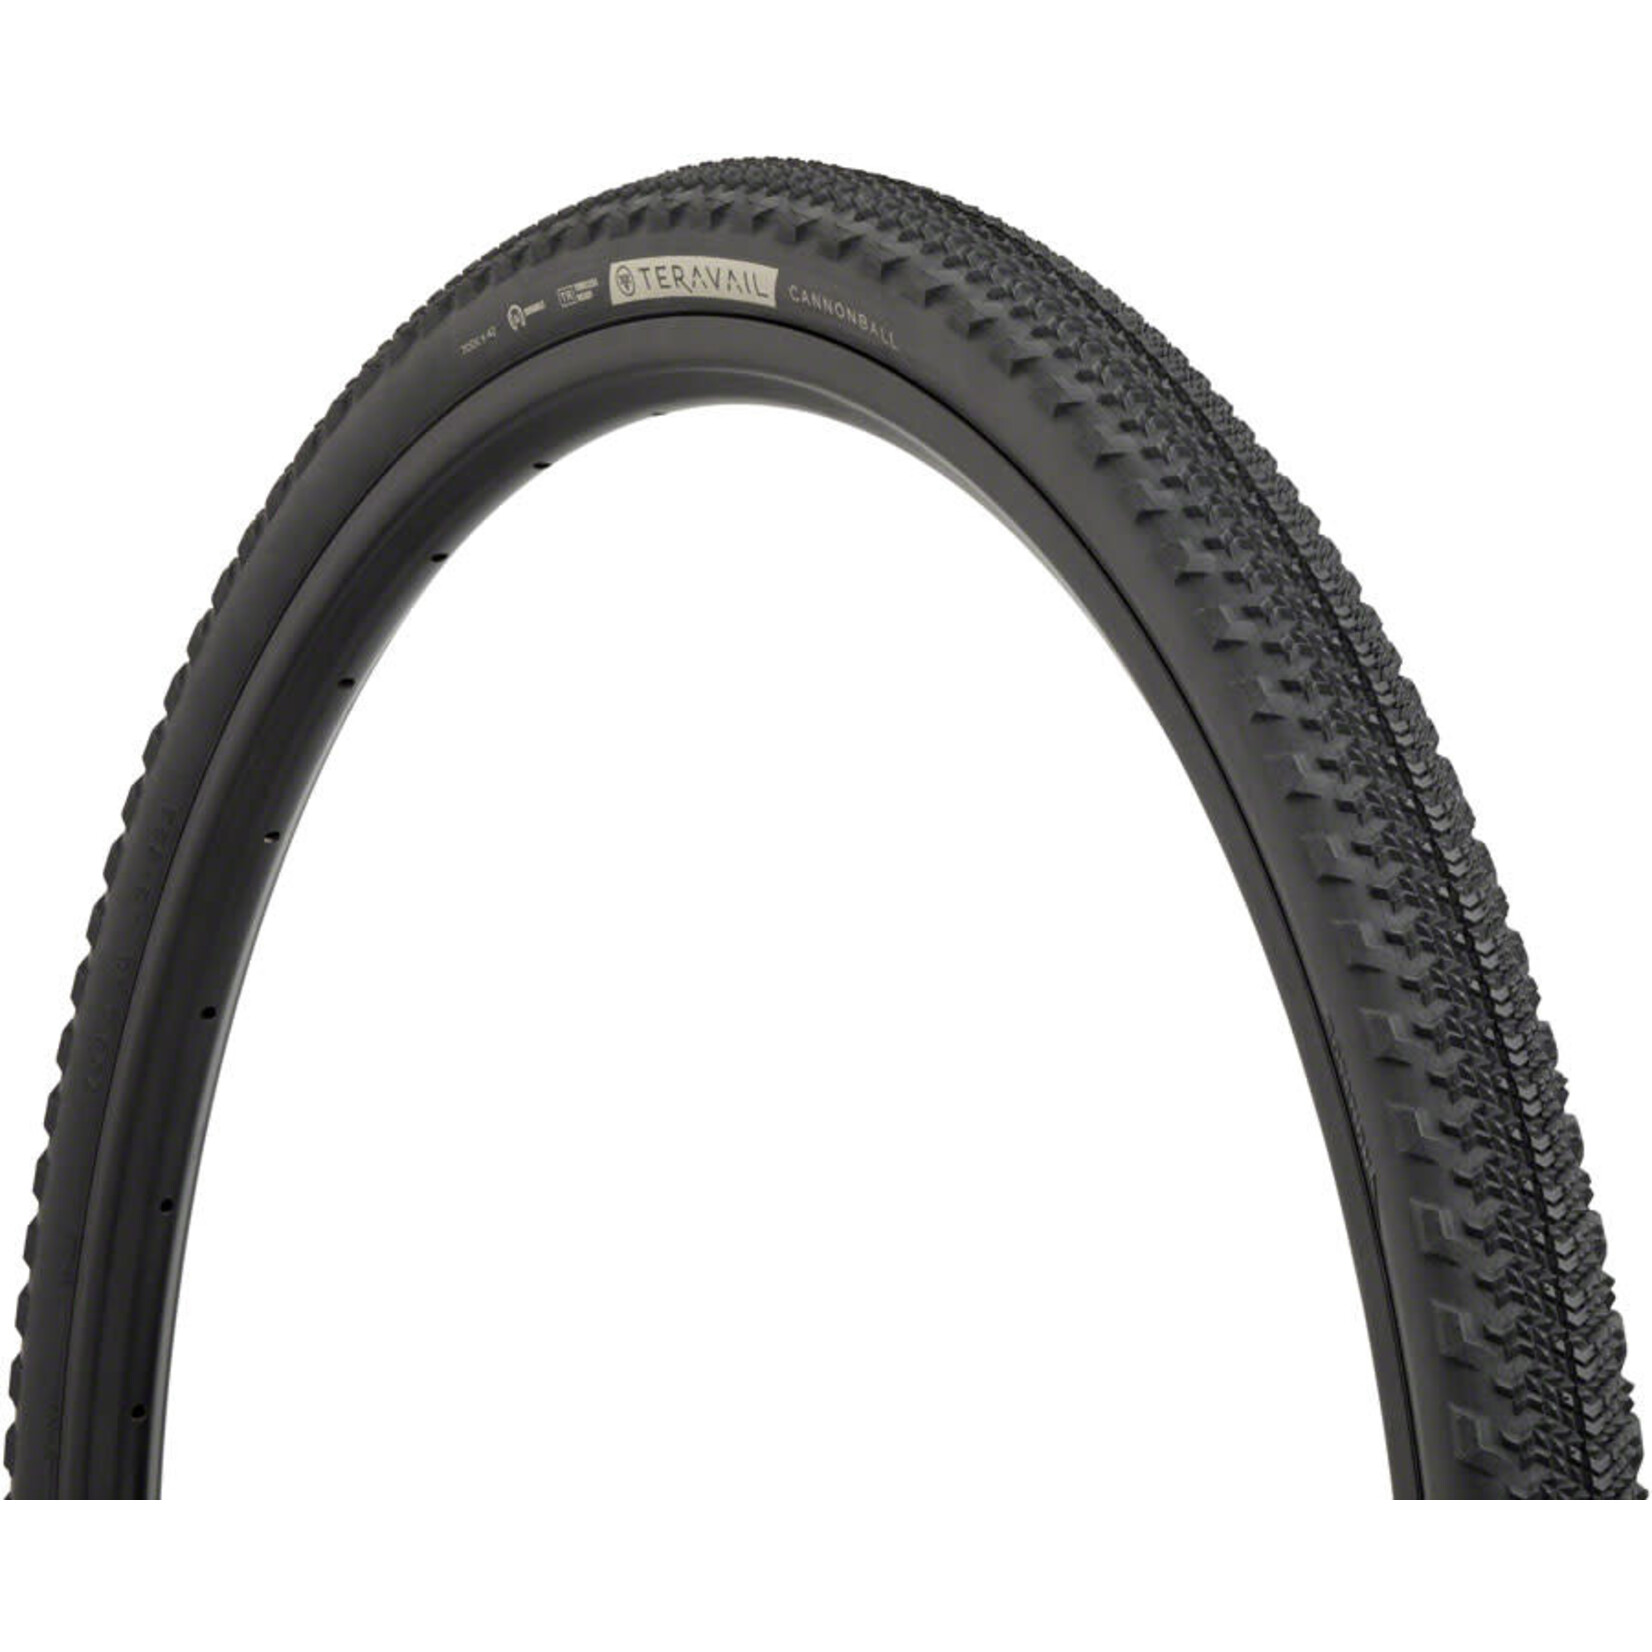 Teravail Teravail Cannonball Tire - 700 x 42, Tubeless, Folding, Black, Light and Supple